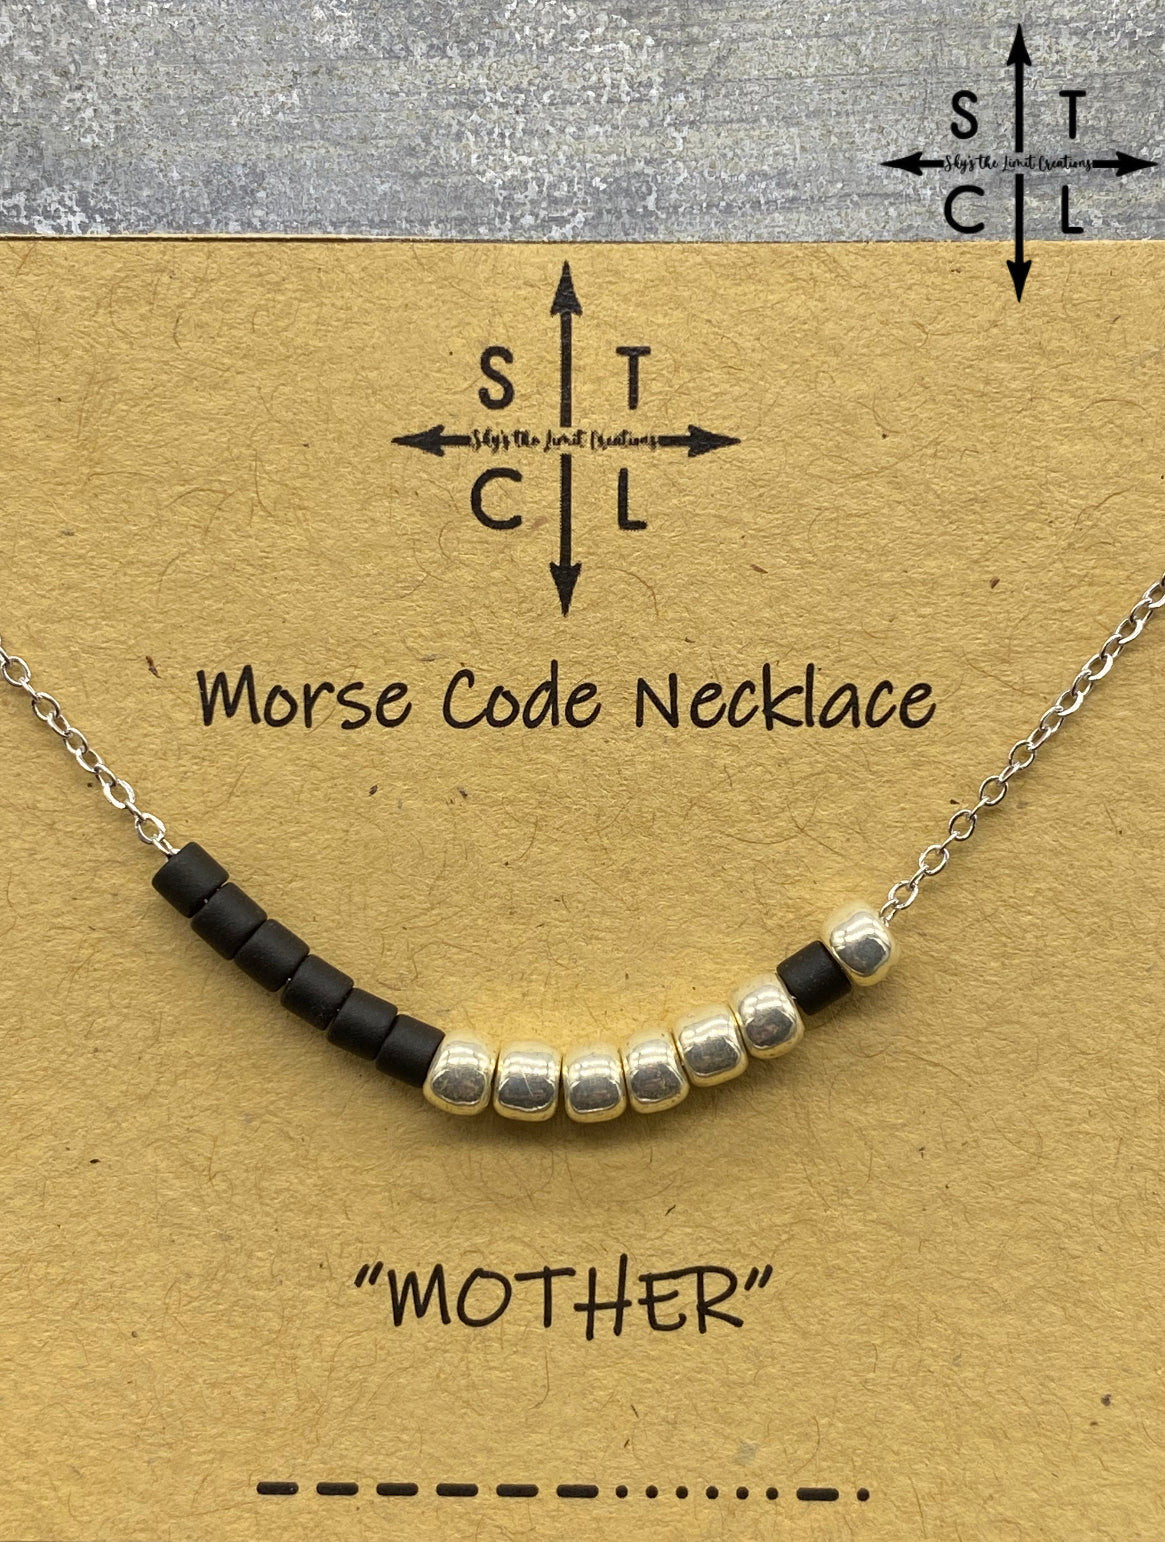 Morse Code Necklace MOTHER